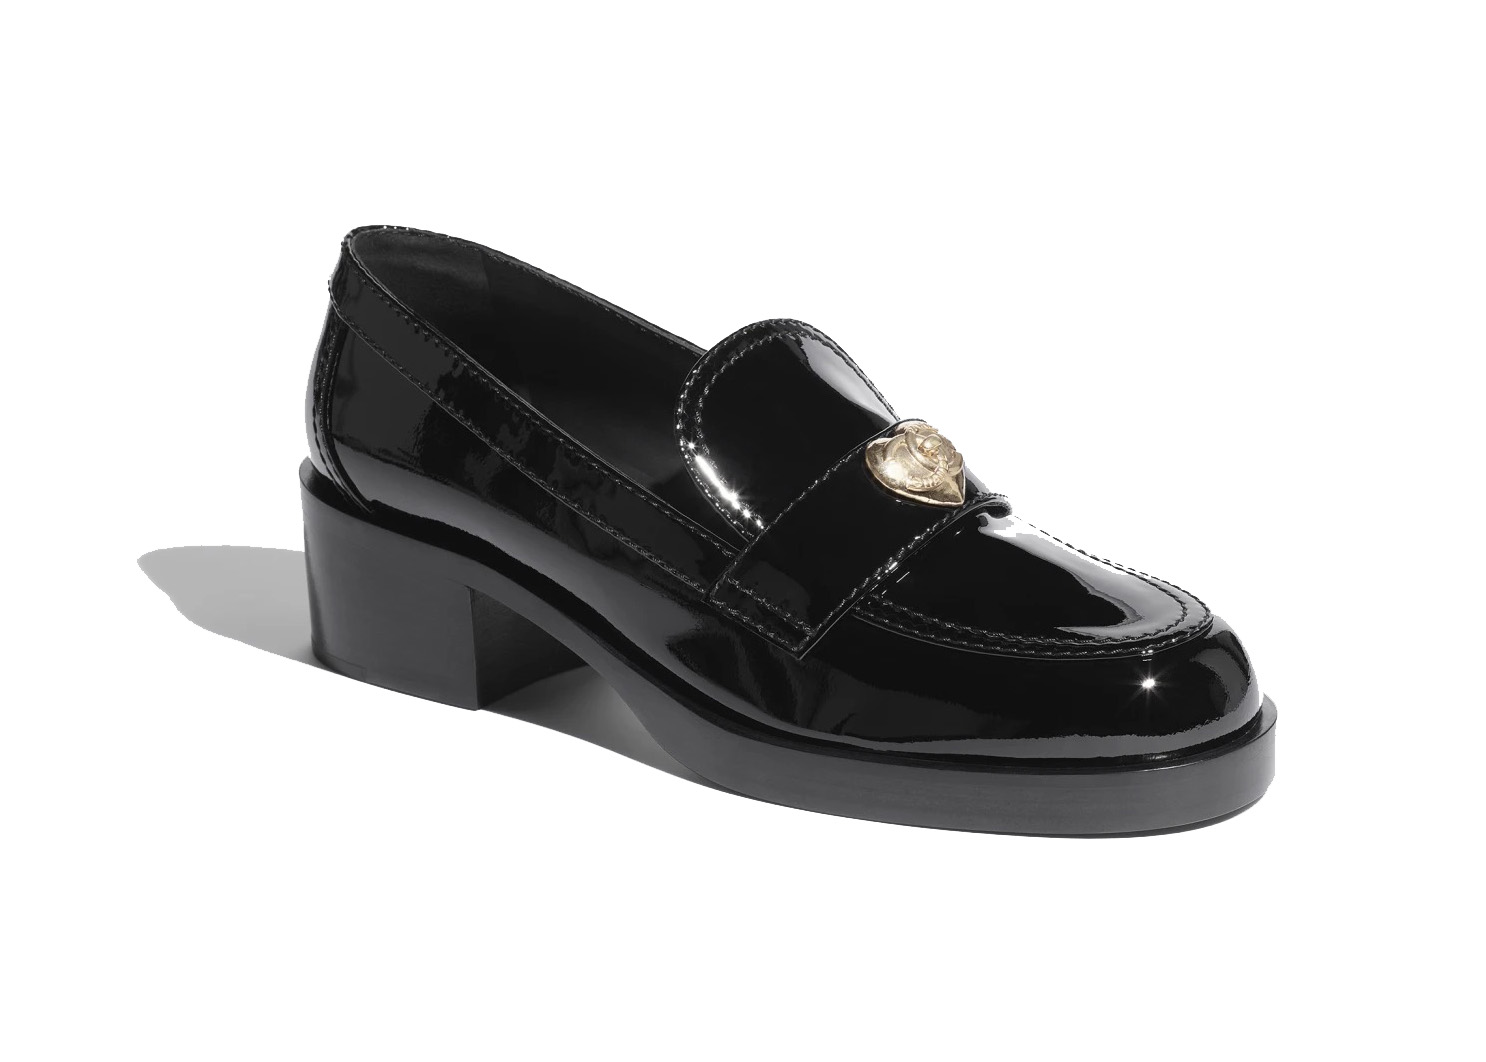 CHANEL CHANEL loafers shoes patent leather White Used Women size 37C  Product Code2104102132084BRAND OFF Online Store